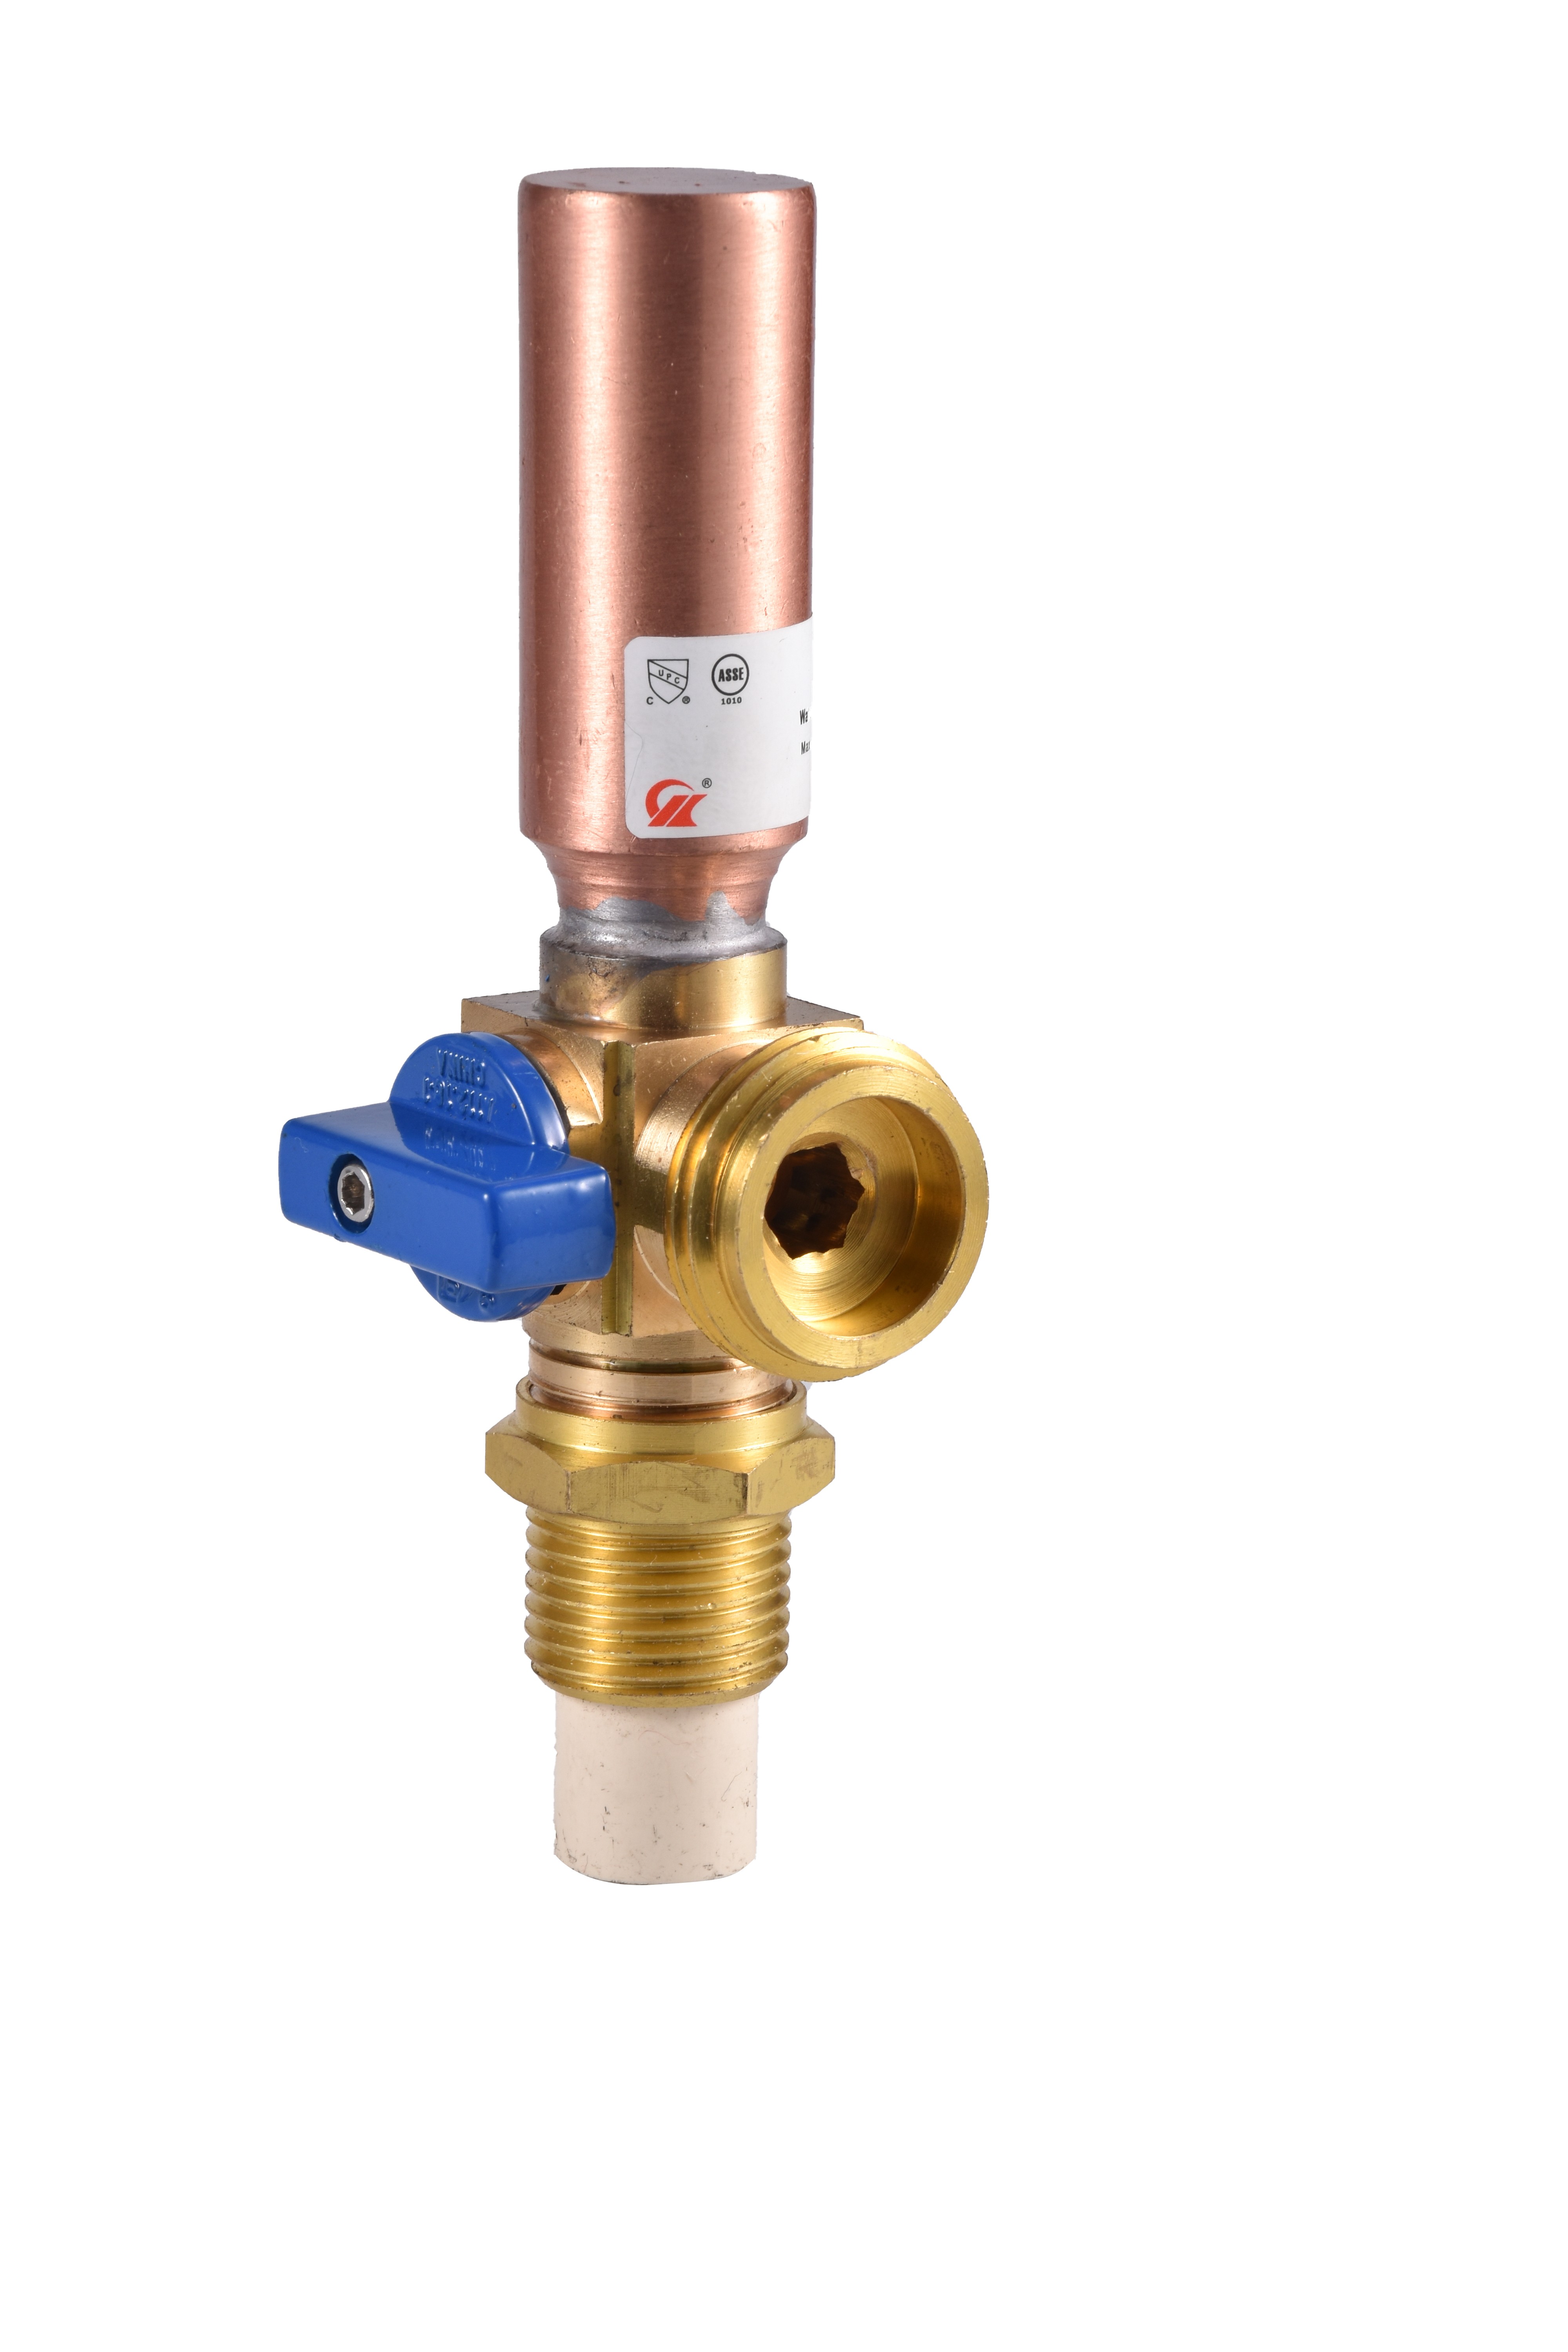 Valve with Copper Water Hammer Arrester 1/2" CPVC x 3/4" MHT Left Blue and Right Red Handle